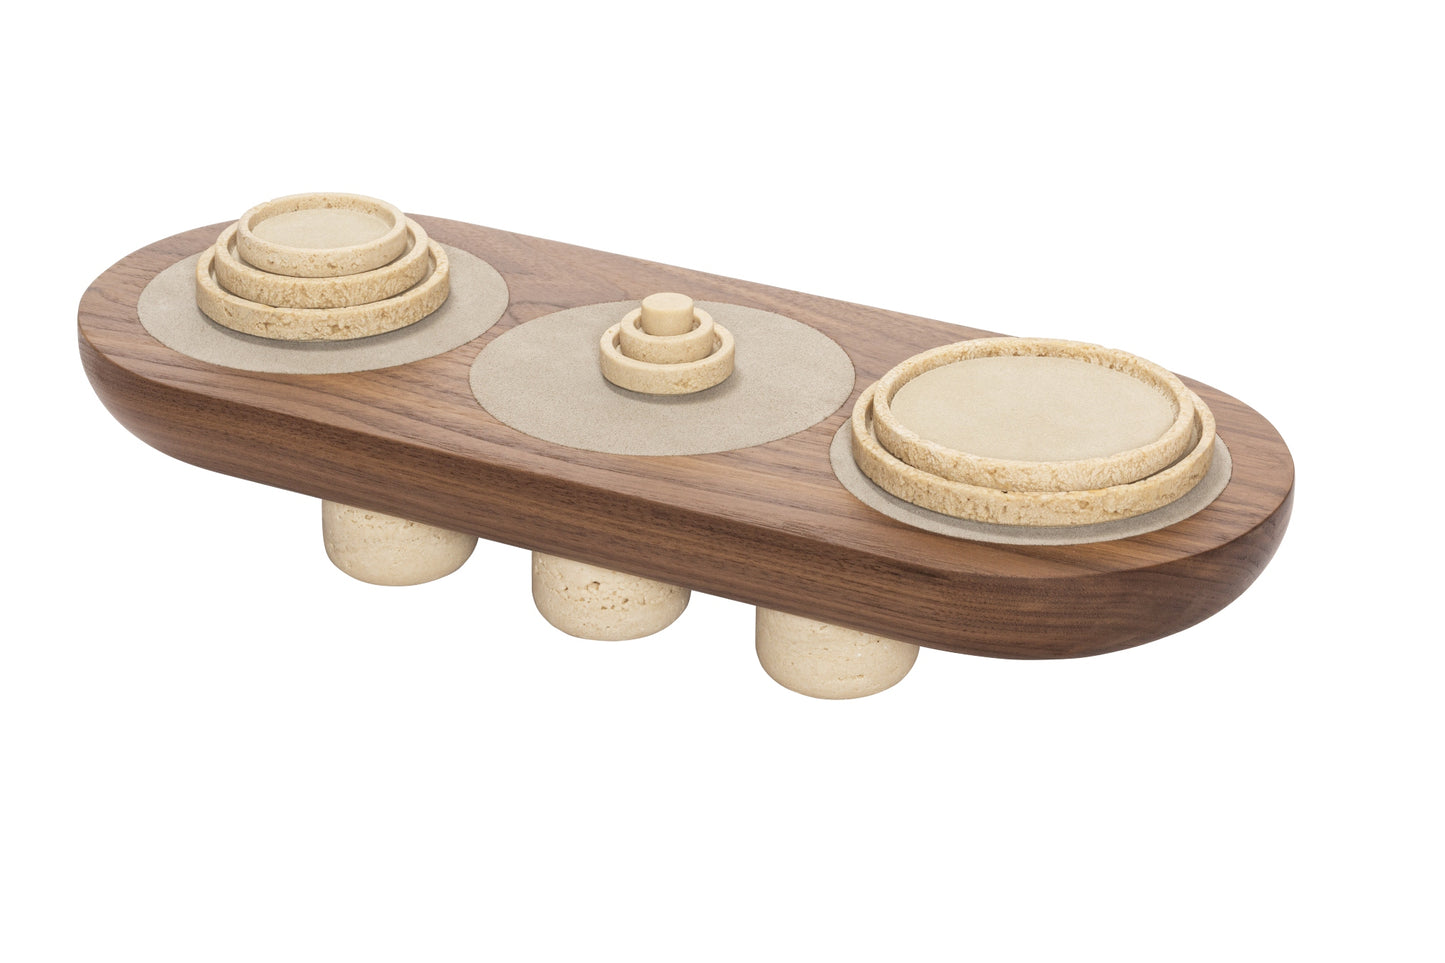 Giobagnara Mocambo Tower Of Hanoi Game Set | Carved Wood and Stone with Modeled, Almost Primitive Lines | Unique and Artistic Design | Explore a Range of Luxury Board Games, Classic Games, and Gift Games at 2Jour Concierge, #1 luxury high-end gift & lifestyle shop